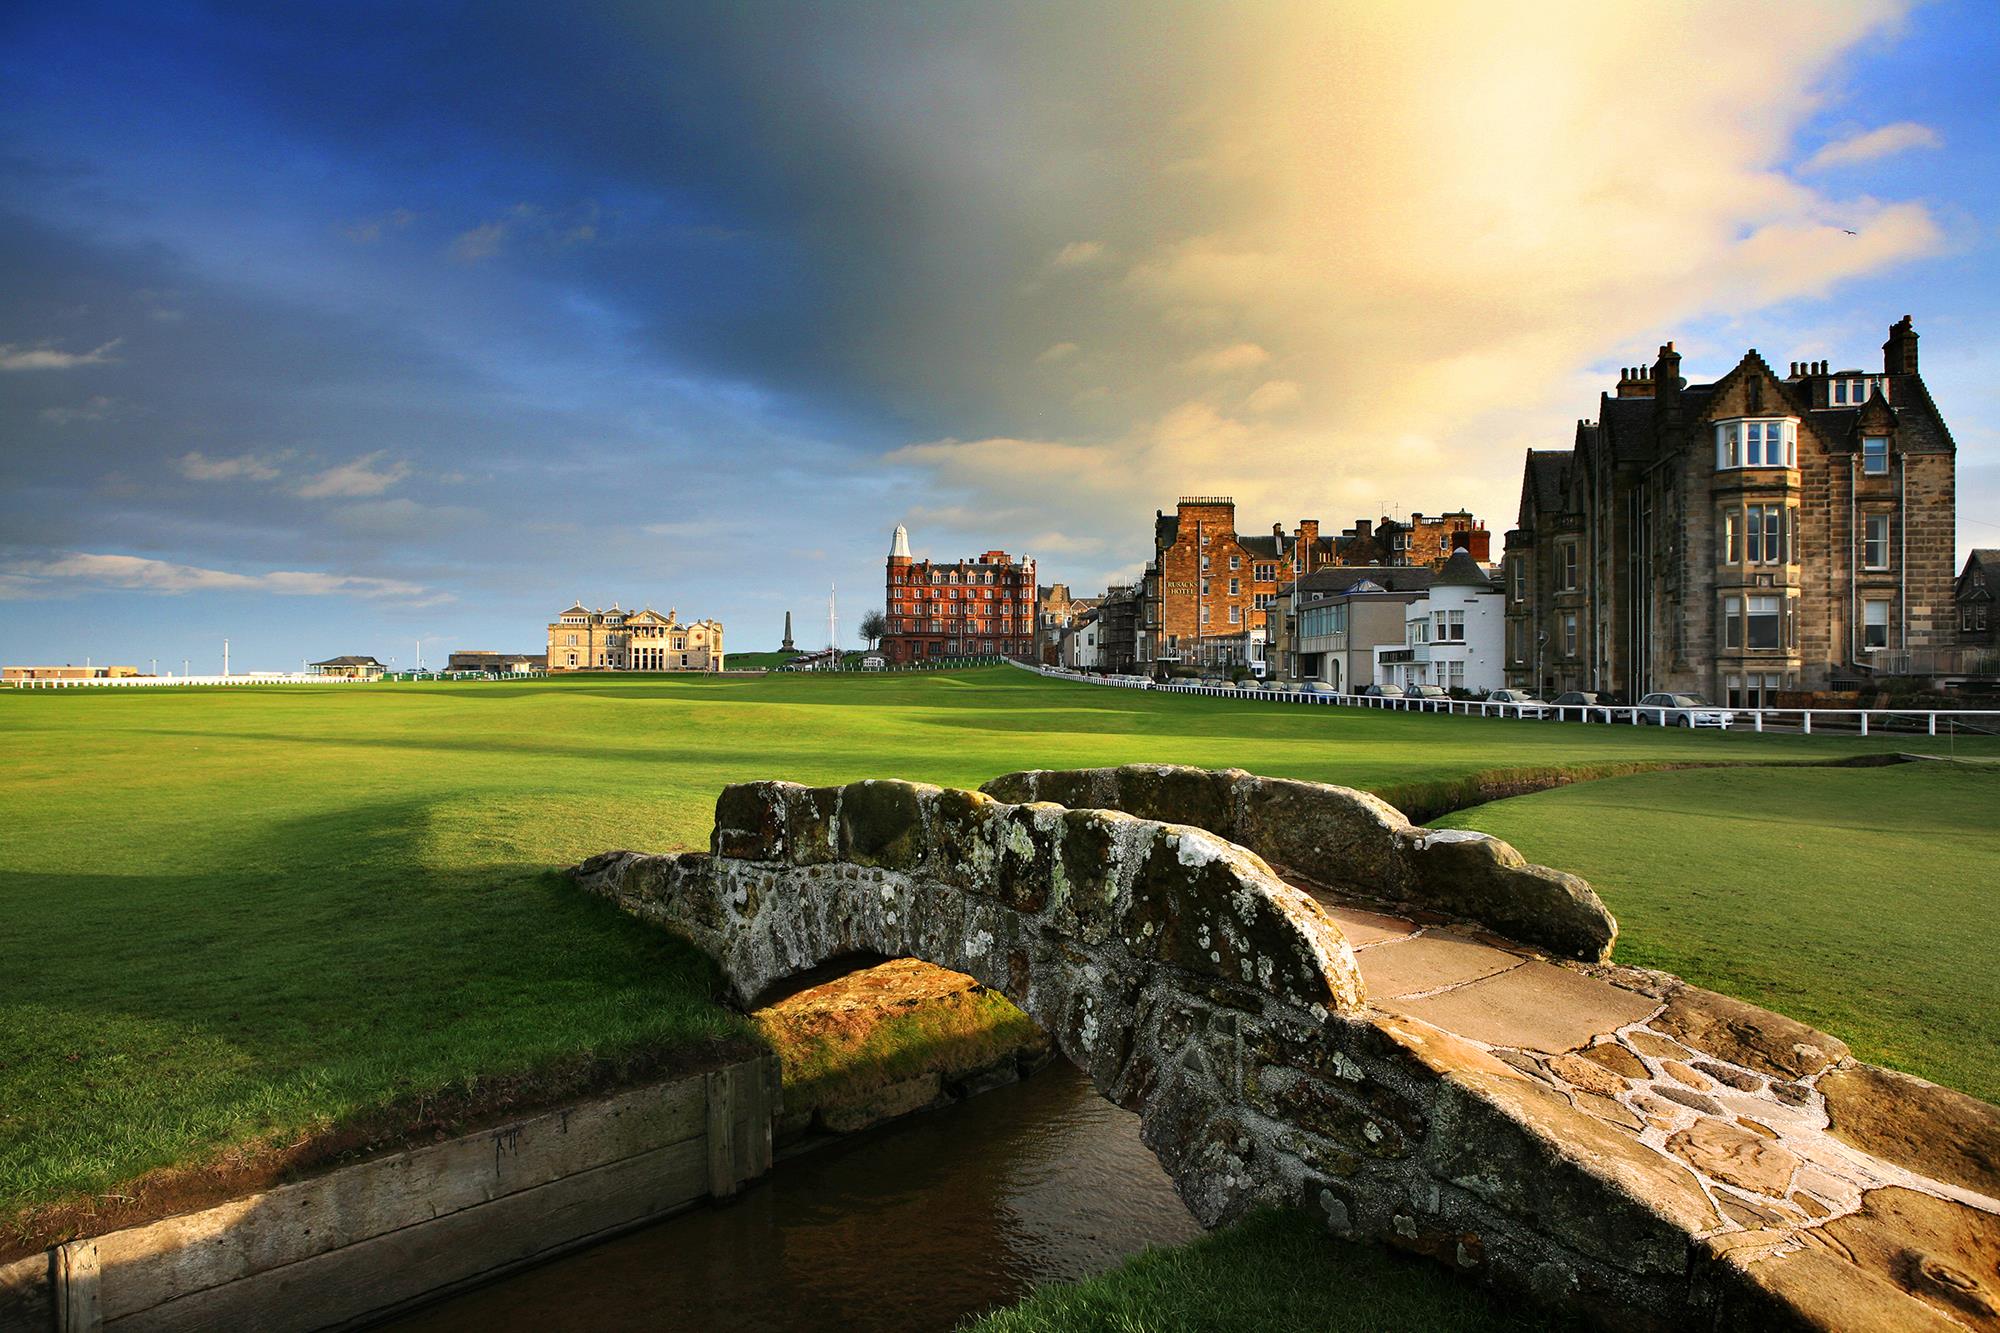 A view of the St. Andrews 18th hole, looking across the Swilcan Bridge.